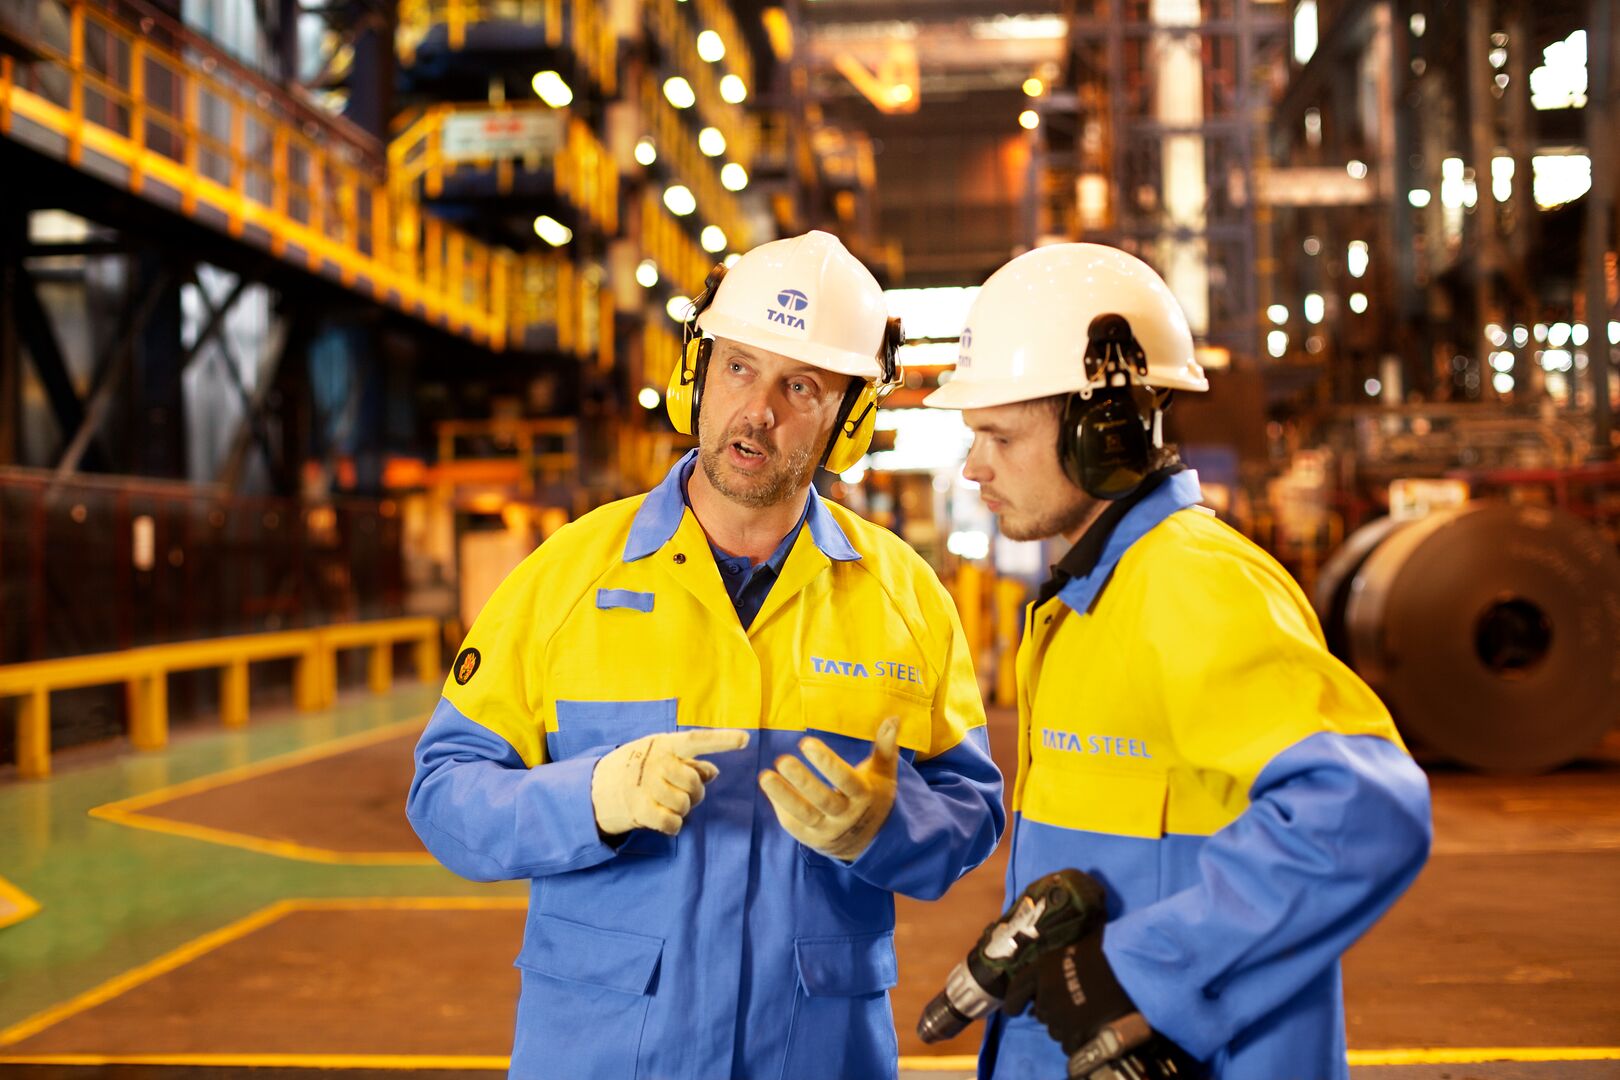 Tata Steel: Steel is bringing families together safely